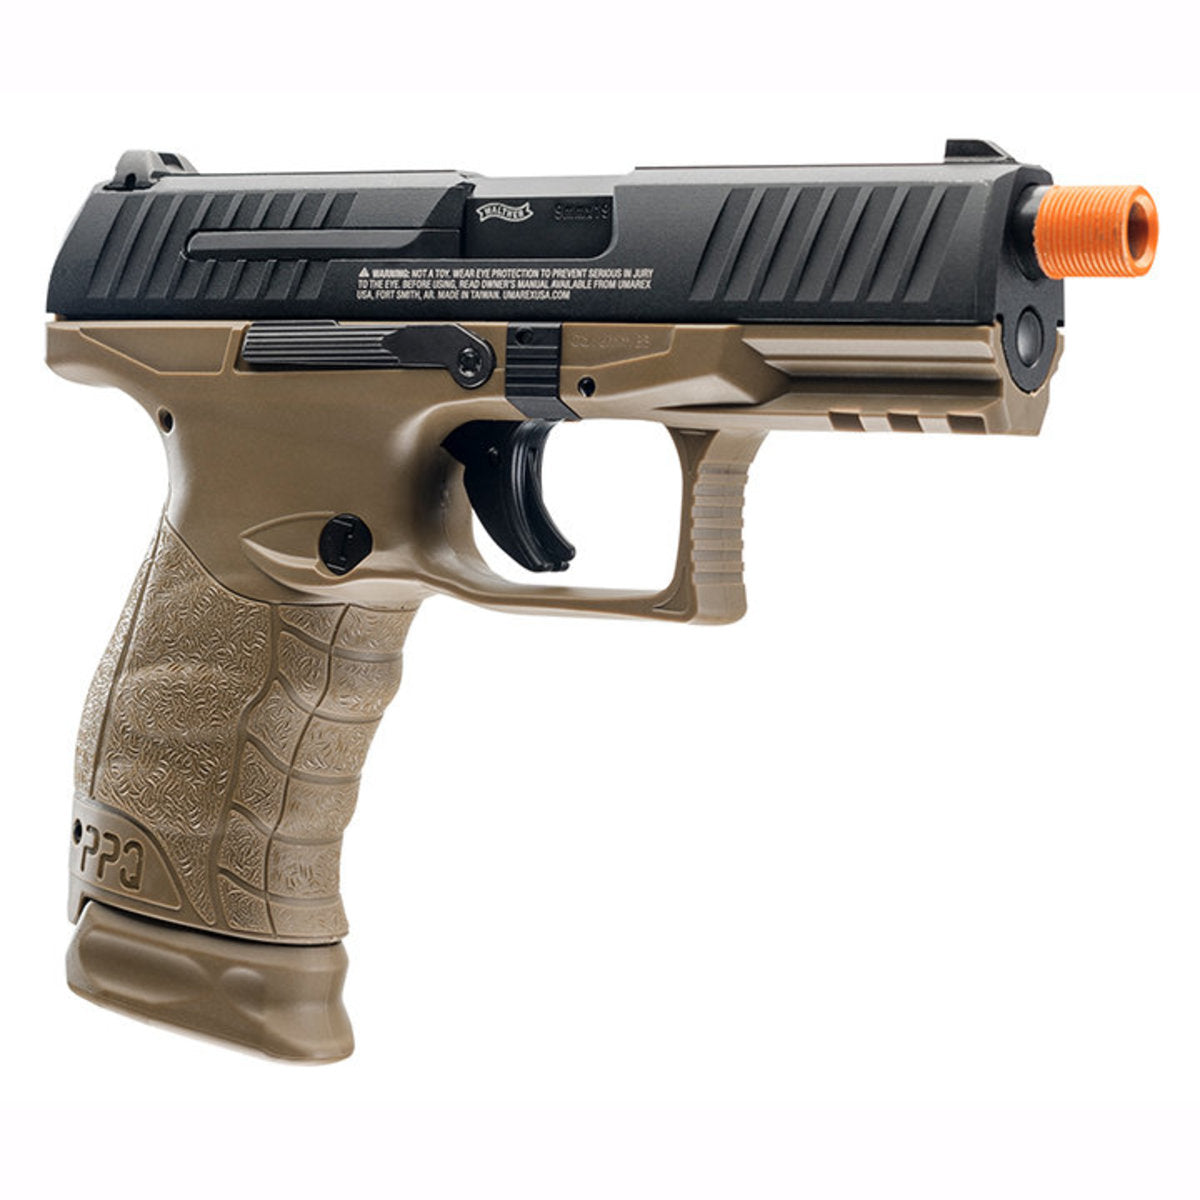 Umarex Walther Ppq Tactical Gbb Airsoft Pistol (Vfc)